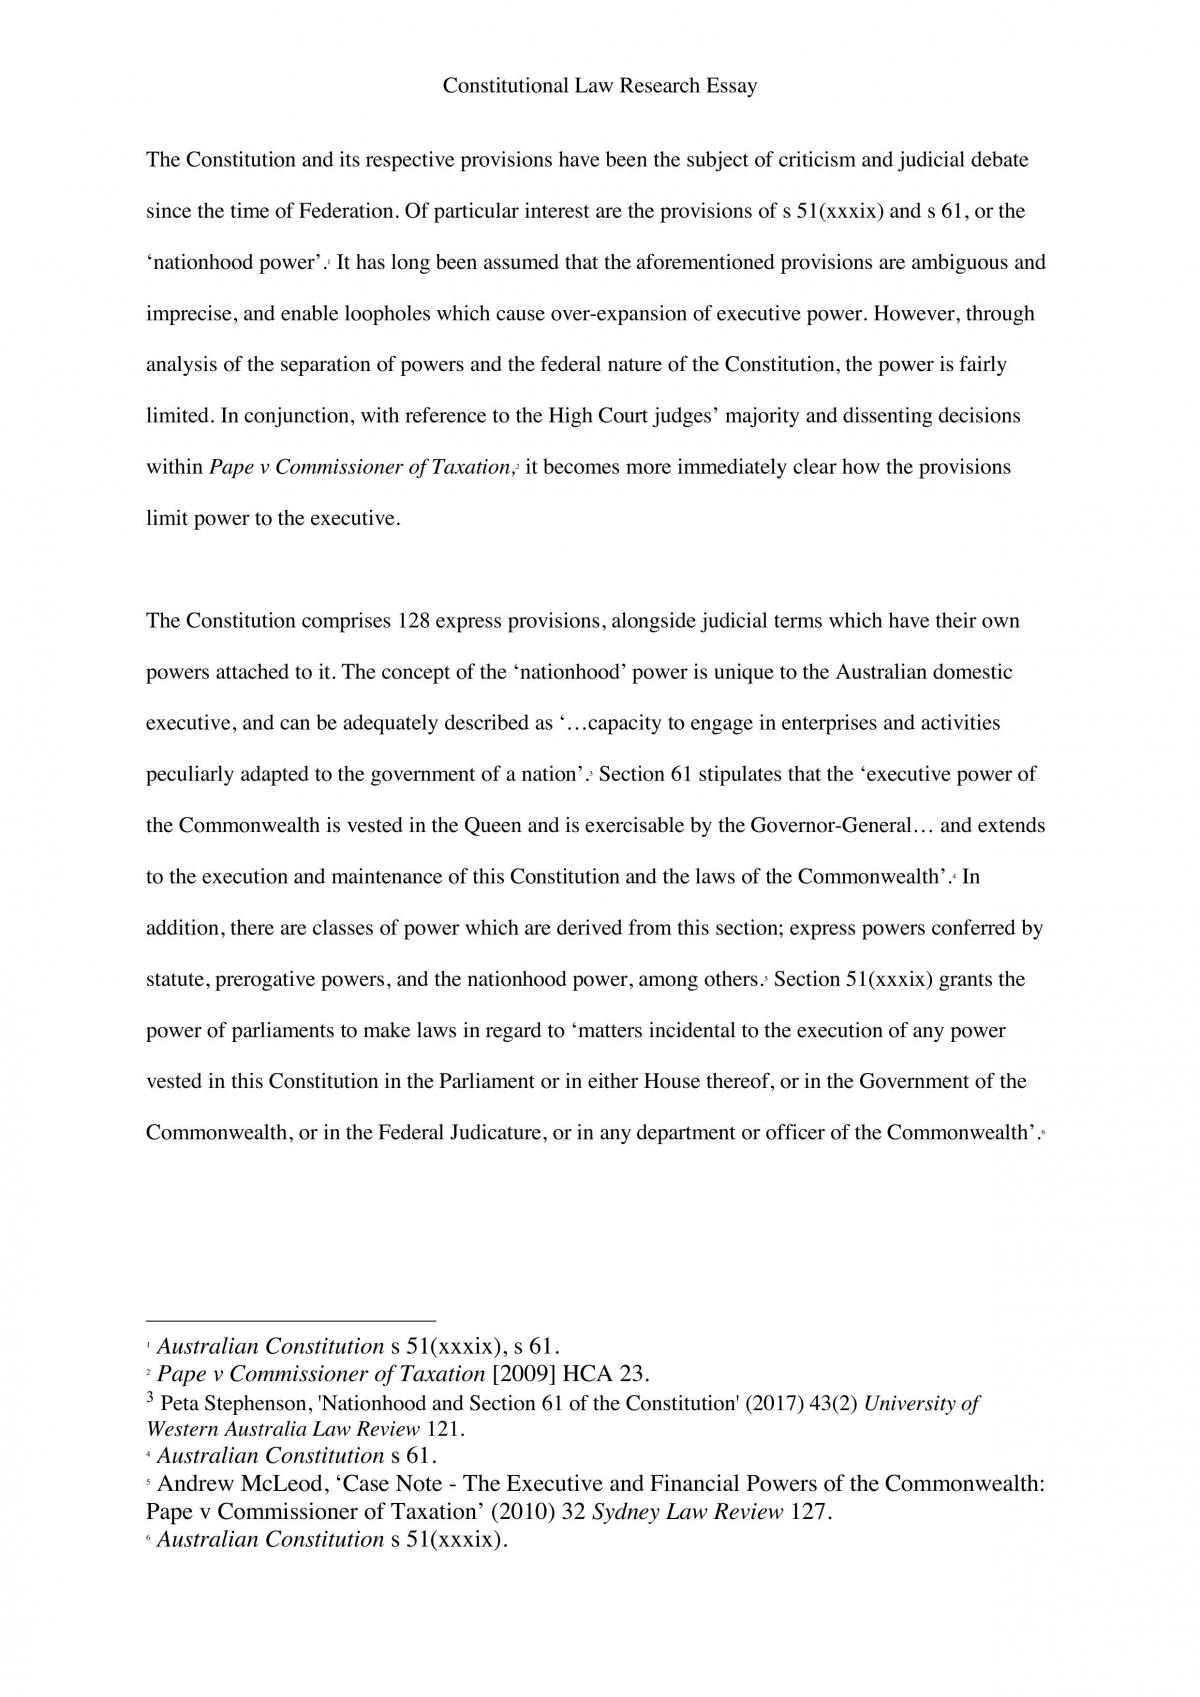 Constitutional Law Research Essay - Page 1